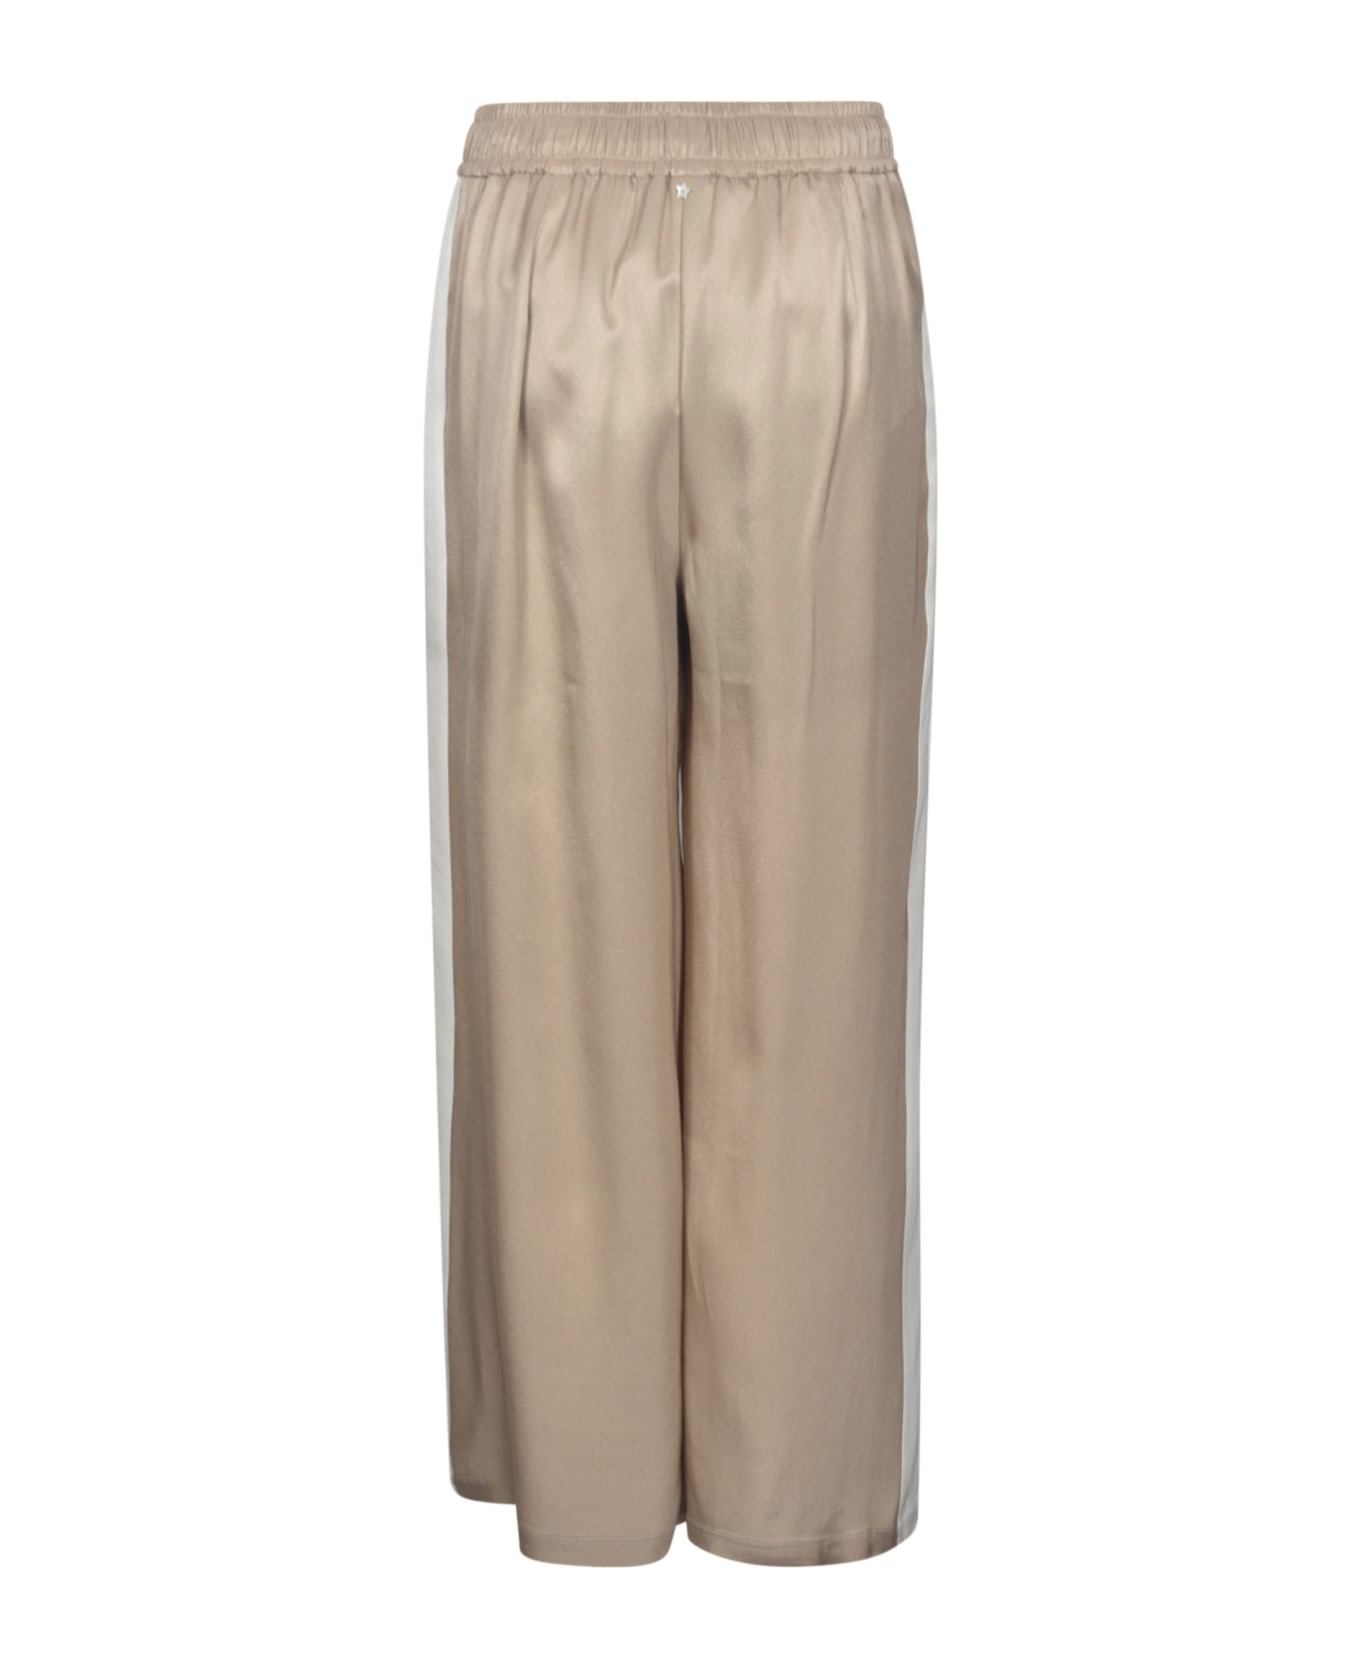 Lorena Antoniazzi Laced Straight Trousers - Beige